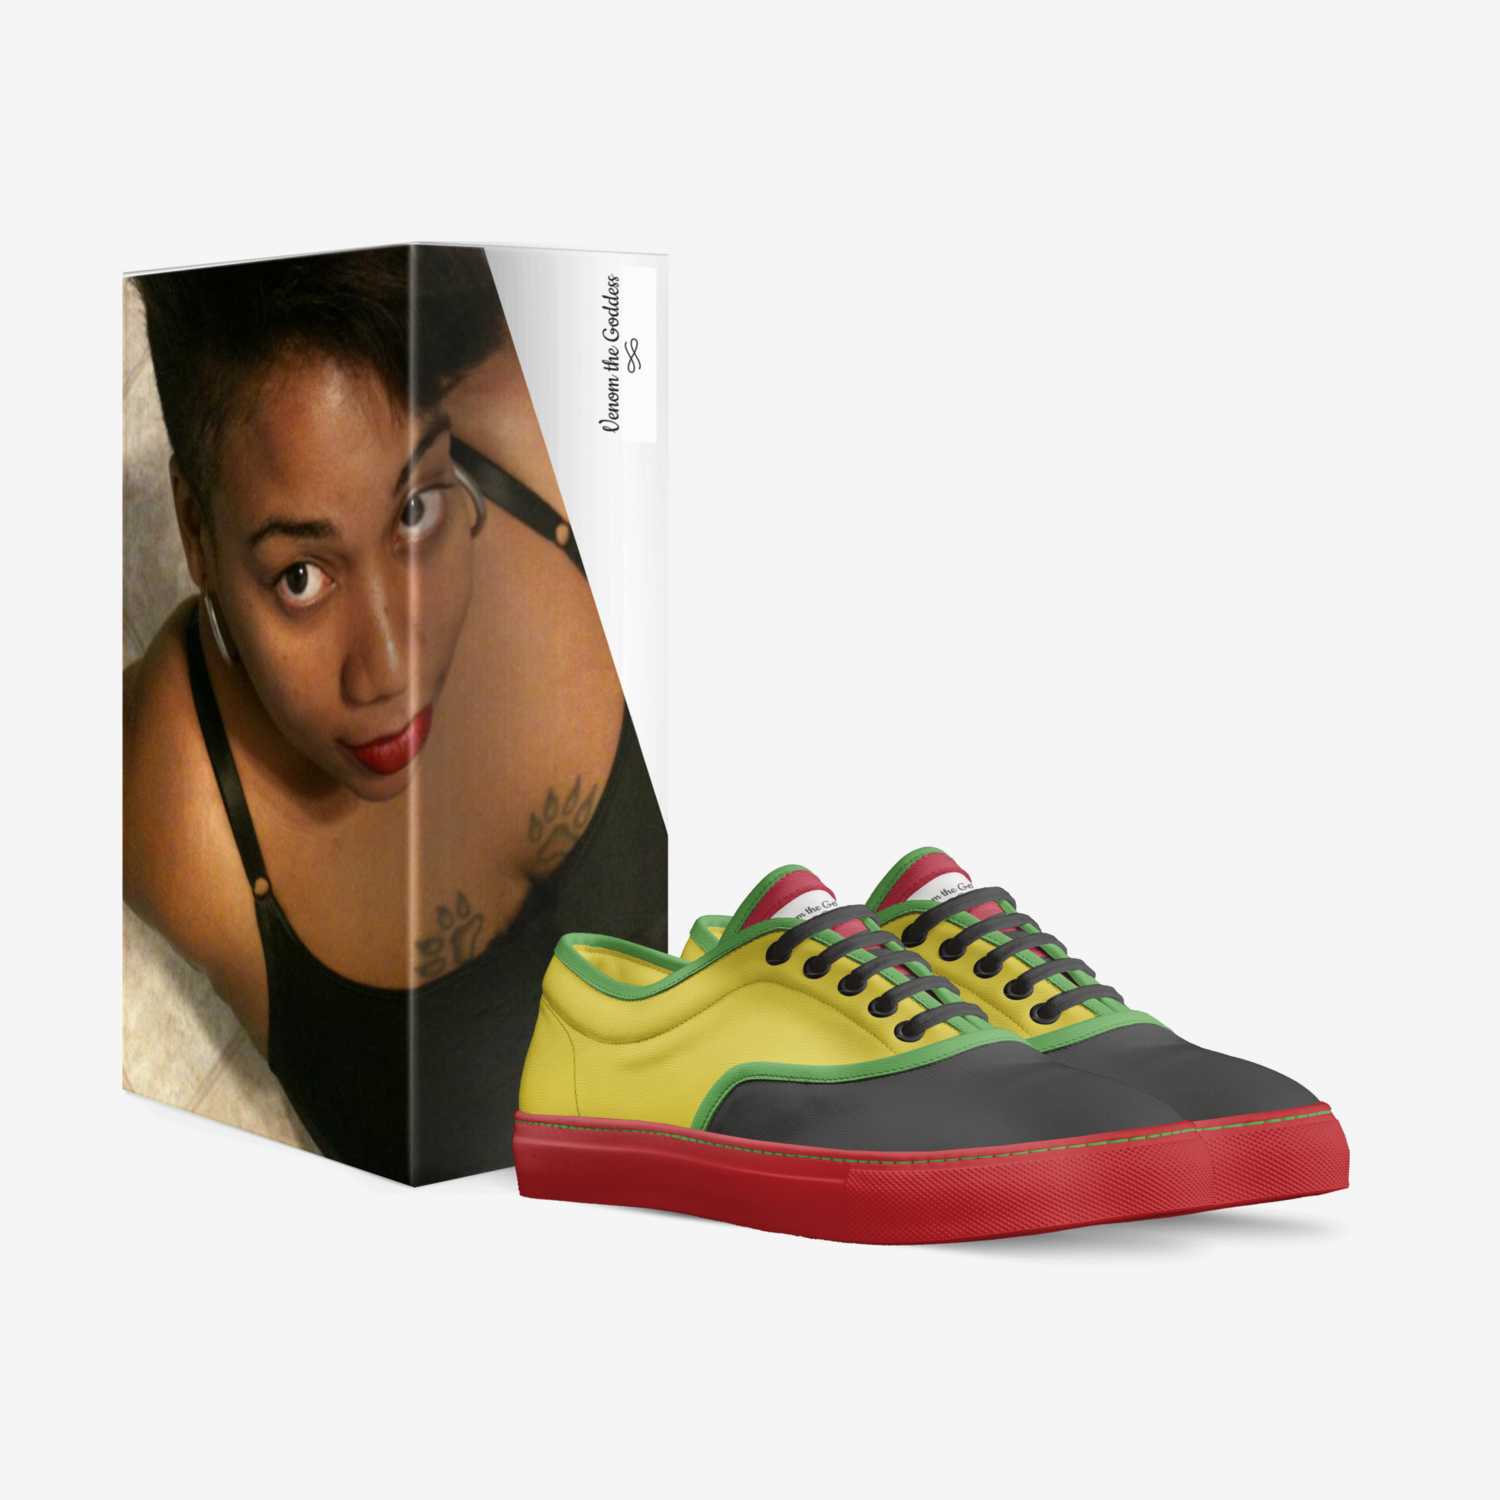 VTG custom made in Italy shoes by Shaletha Taylor | Box view